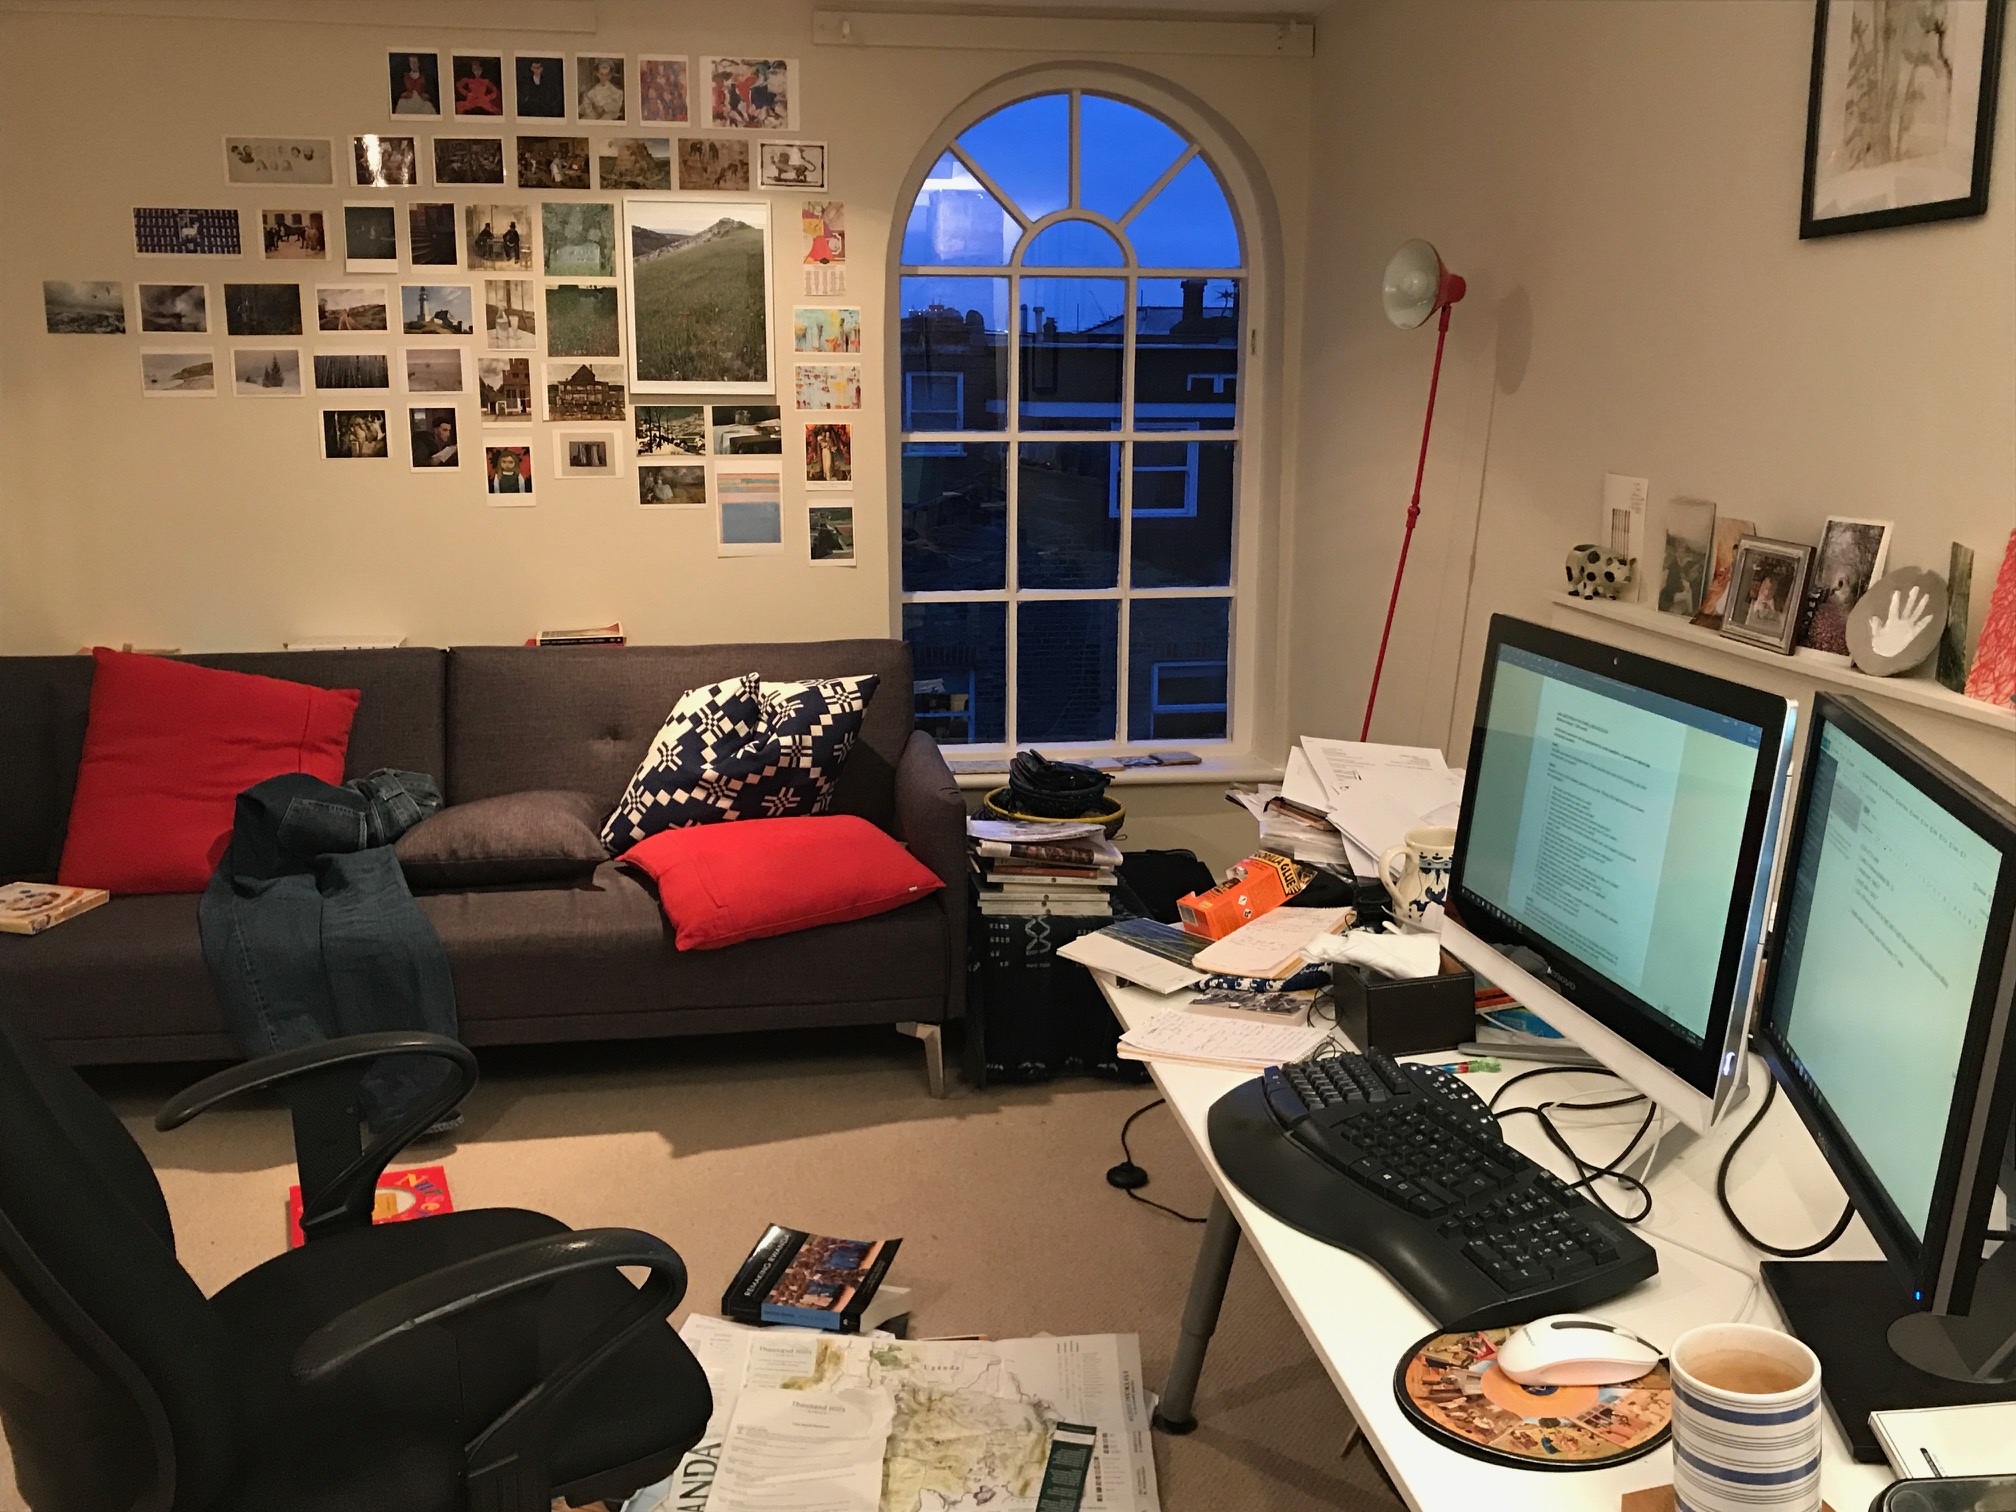 The author's workspace.